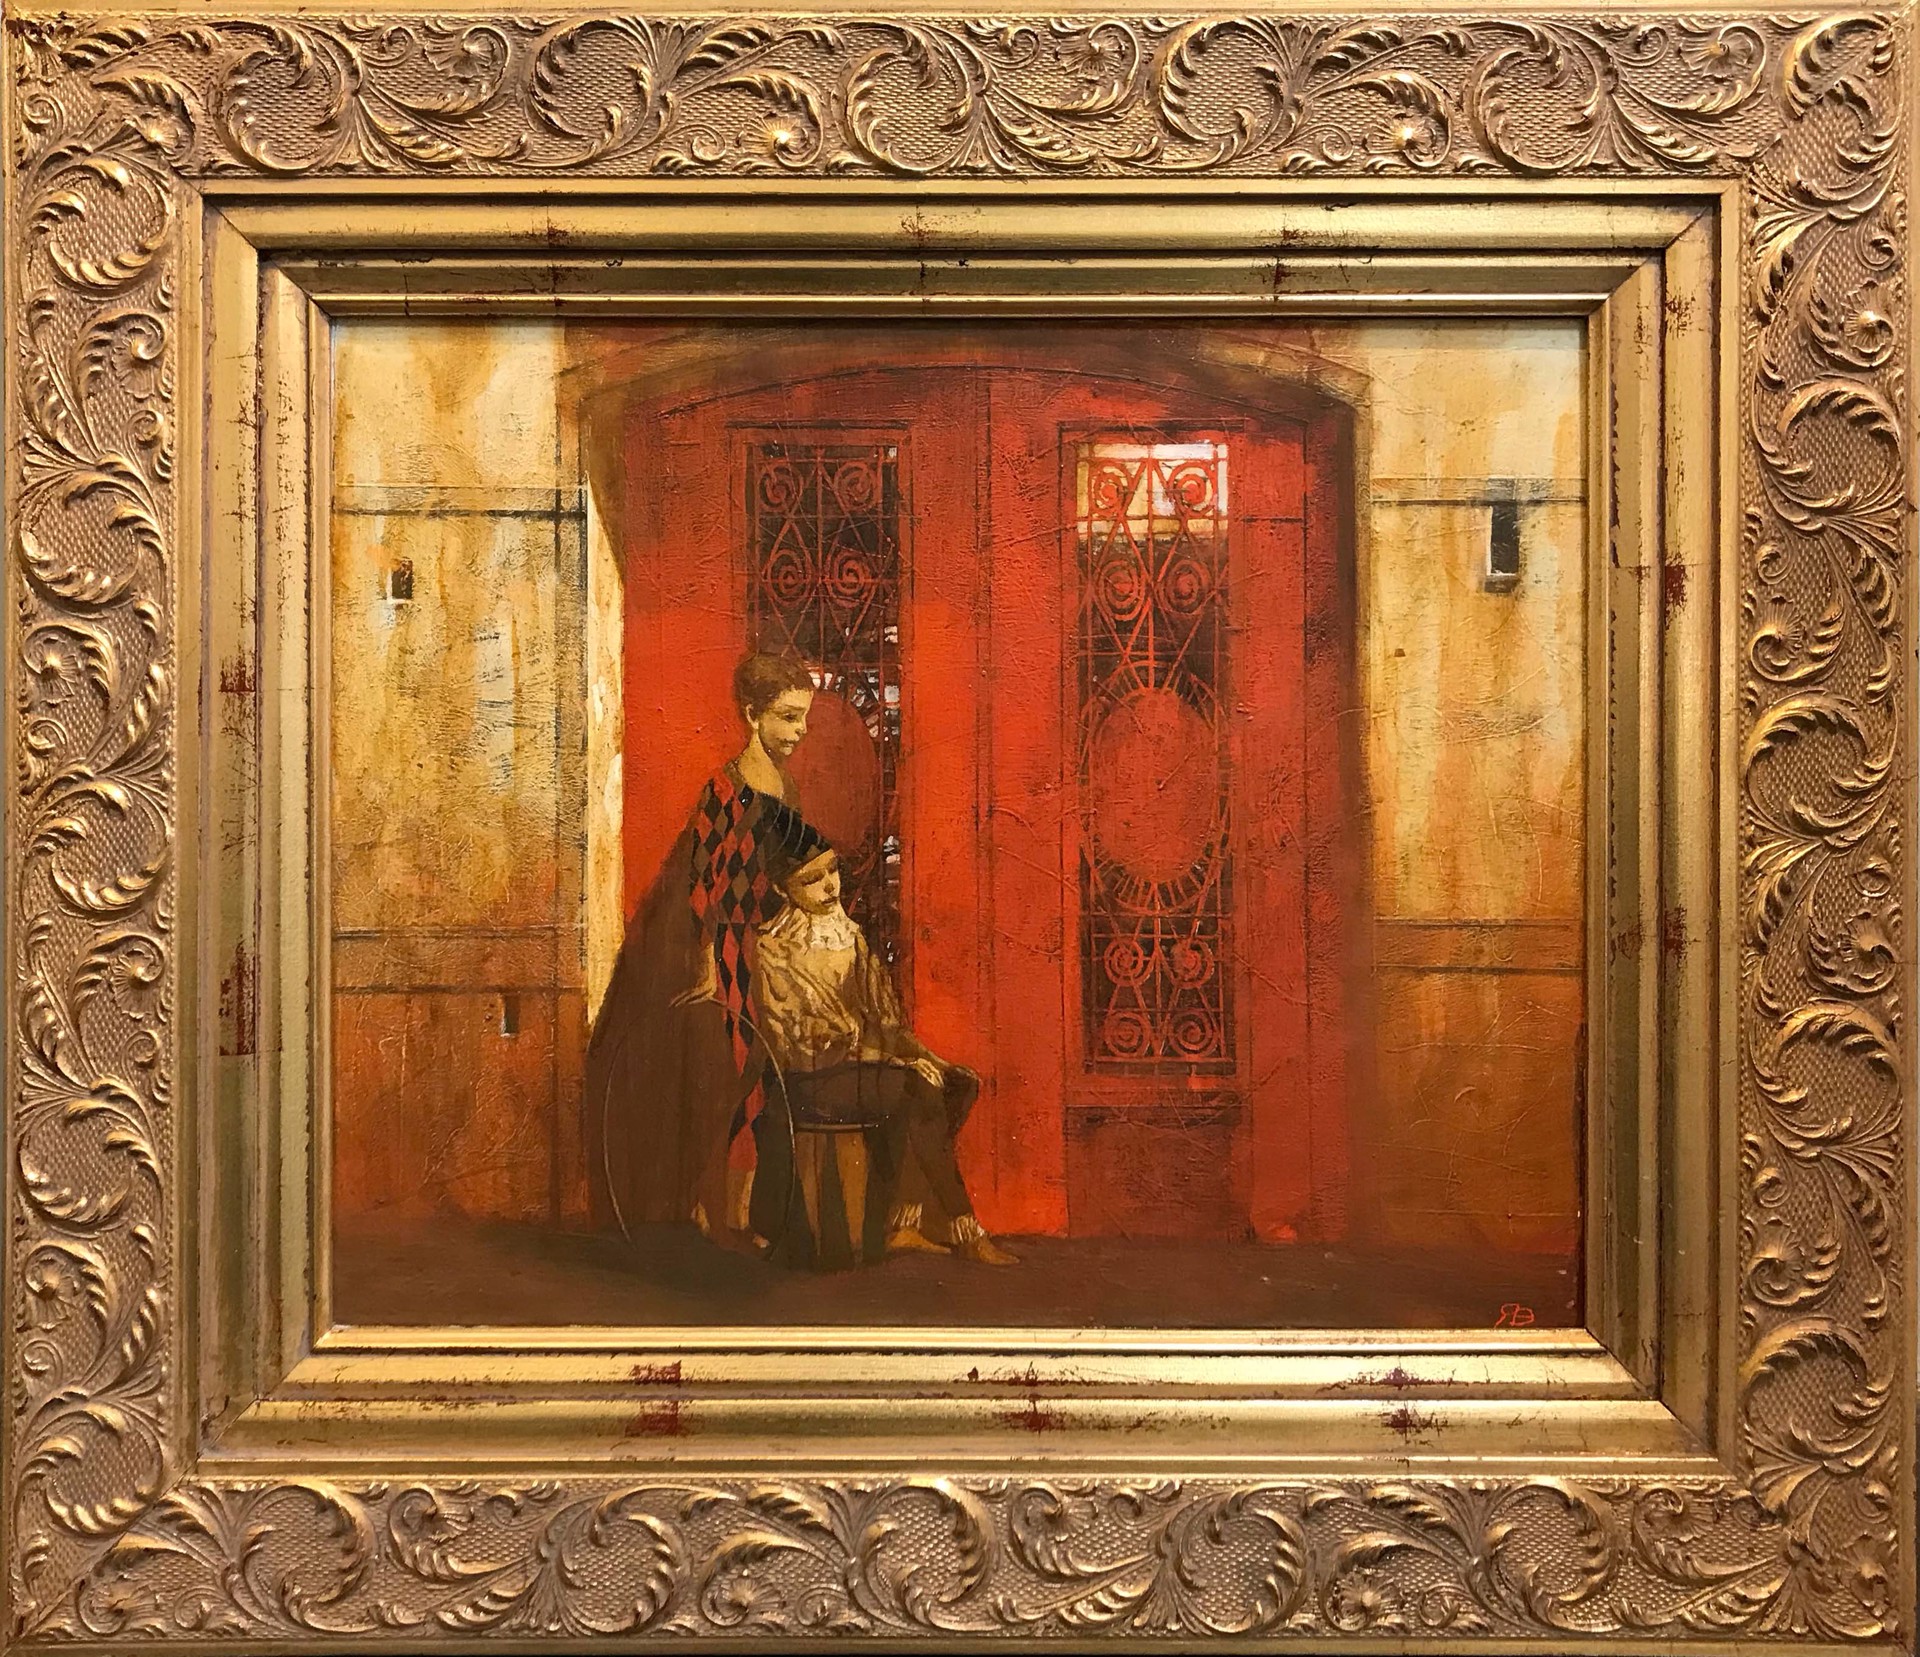 The Red Door by Edvard Yashin